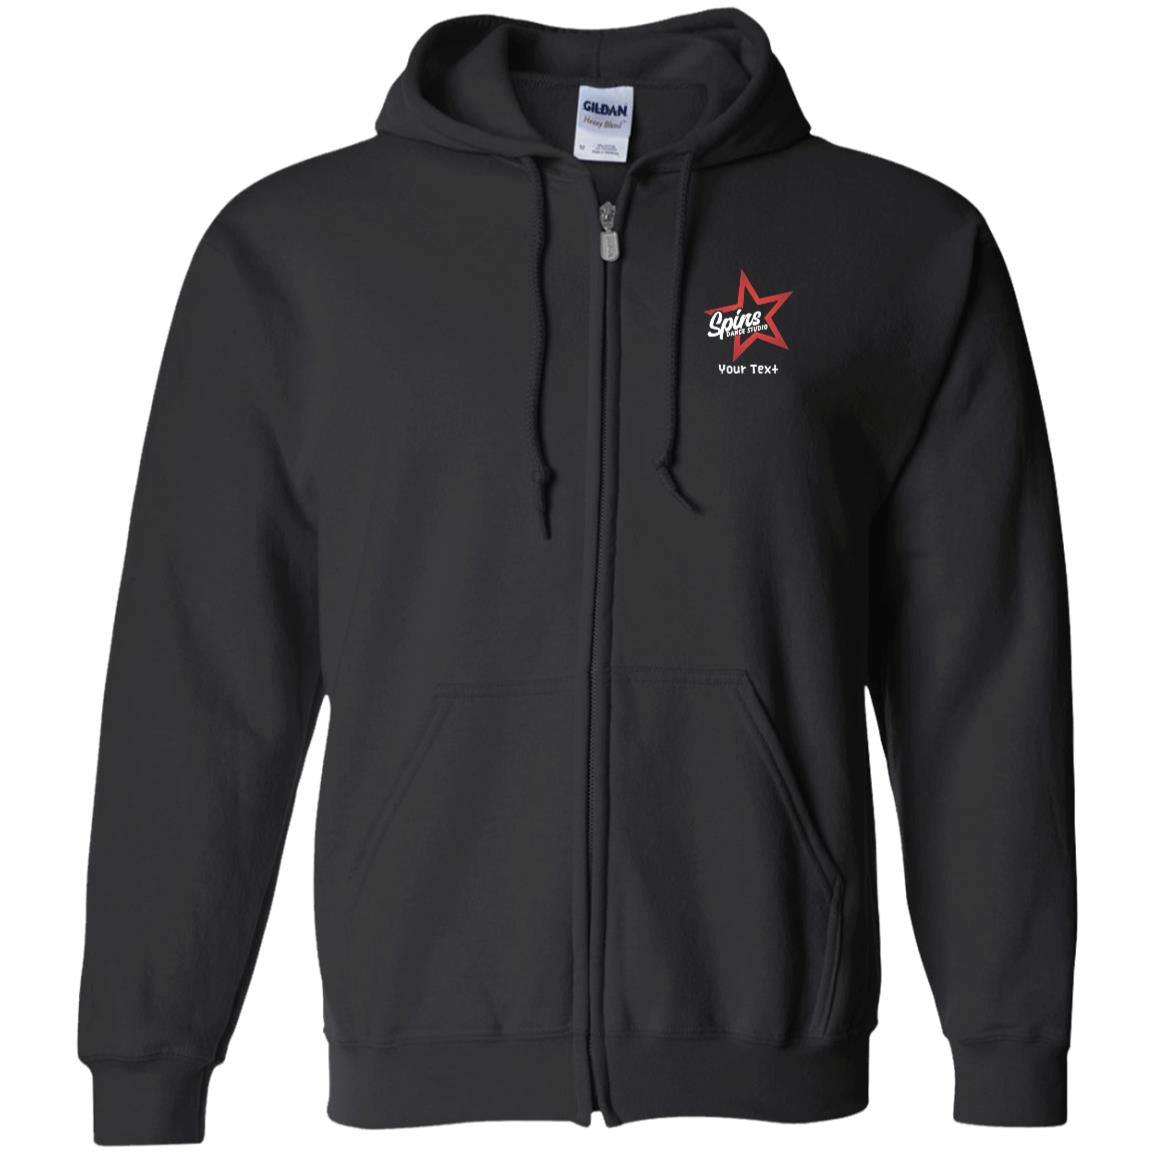 Spins Zip Up Hooded Sweatshirt - With Personalization